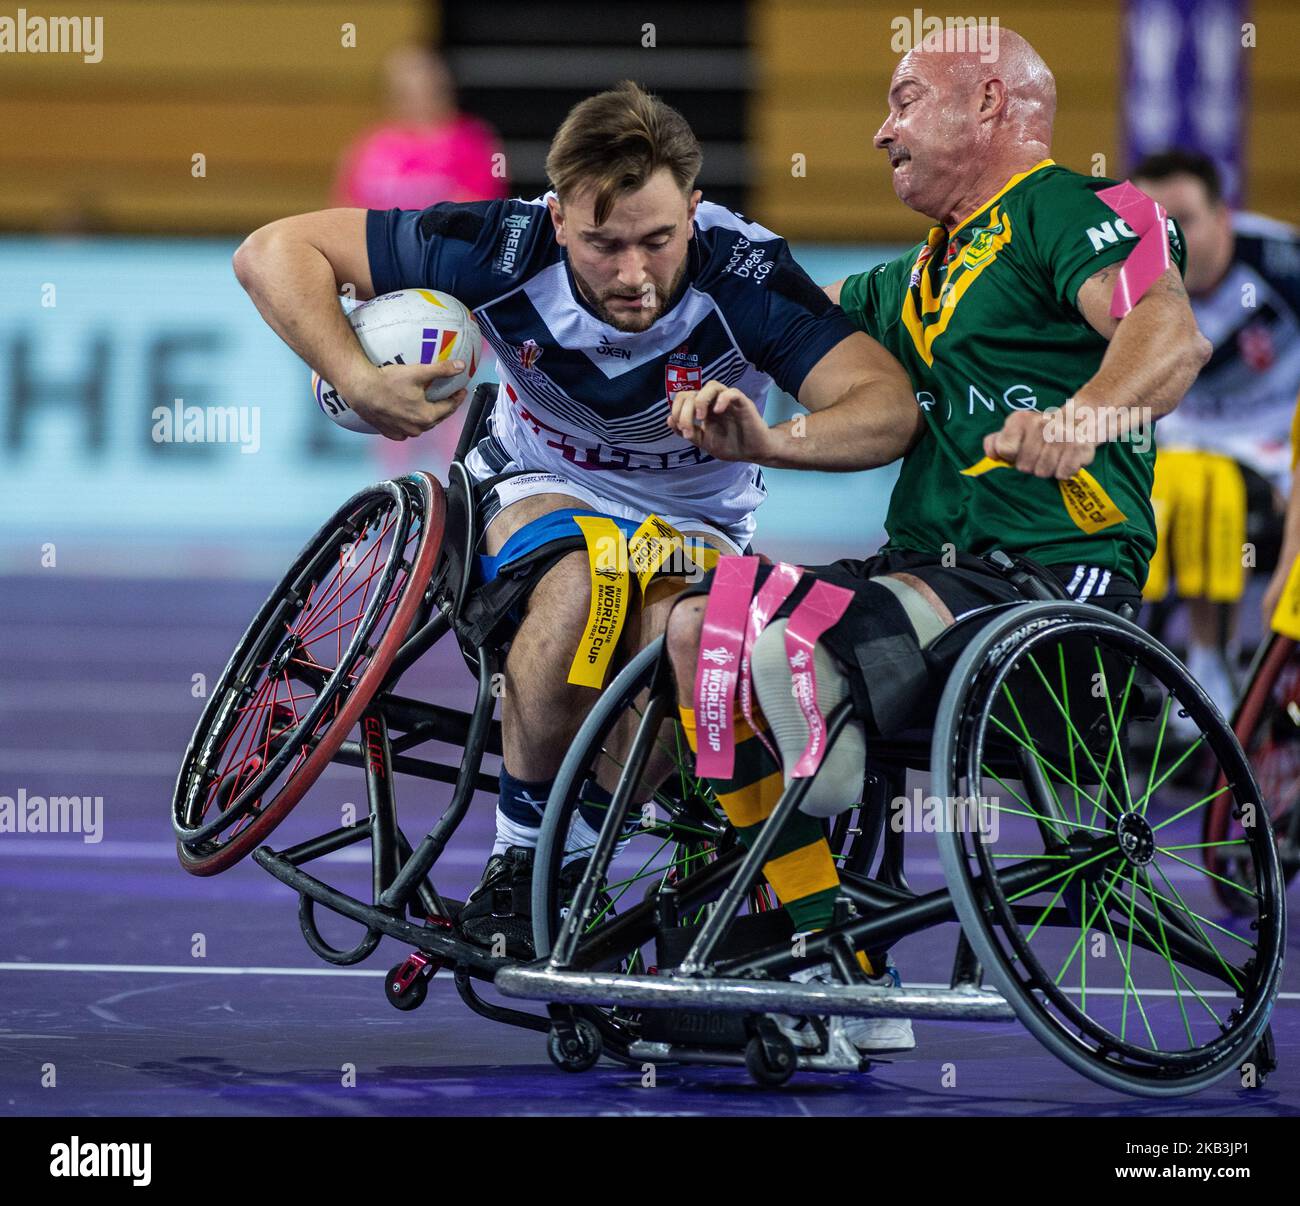 England's Sebastien Bechara is tackled by Australia's Peter Arbuckle during the Wheelchair Rugby League World Cup group A match at the Copper Box Arena, London. Picture date: Thursday November 3, 2022. Stock Photo